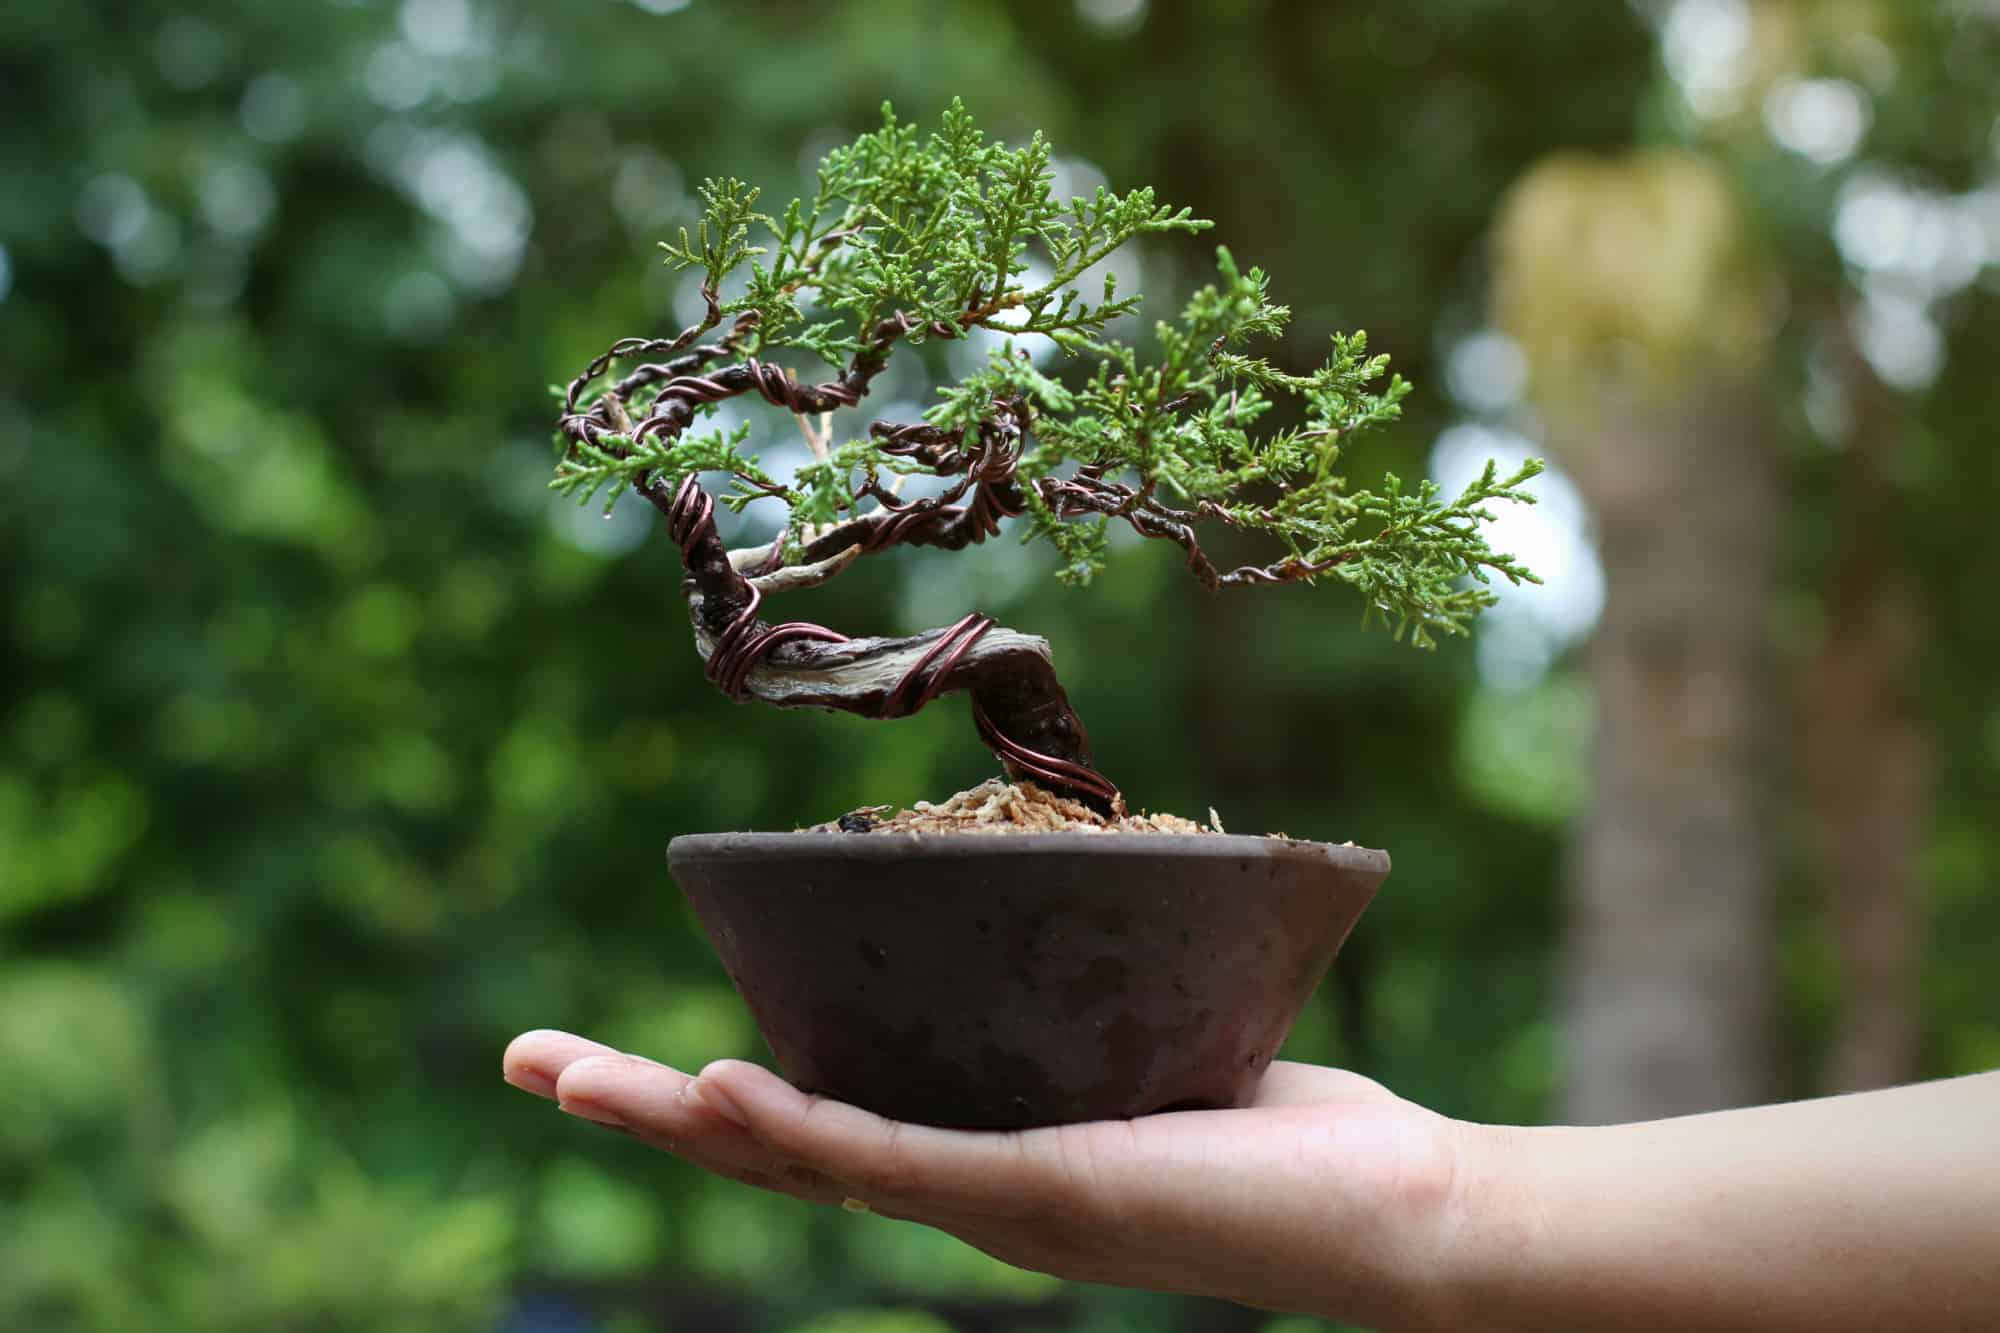 Bonsai artist takes care of his plant, wiring branches and trunk